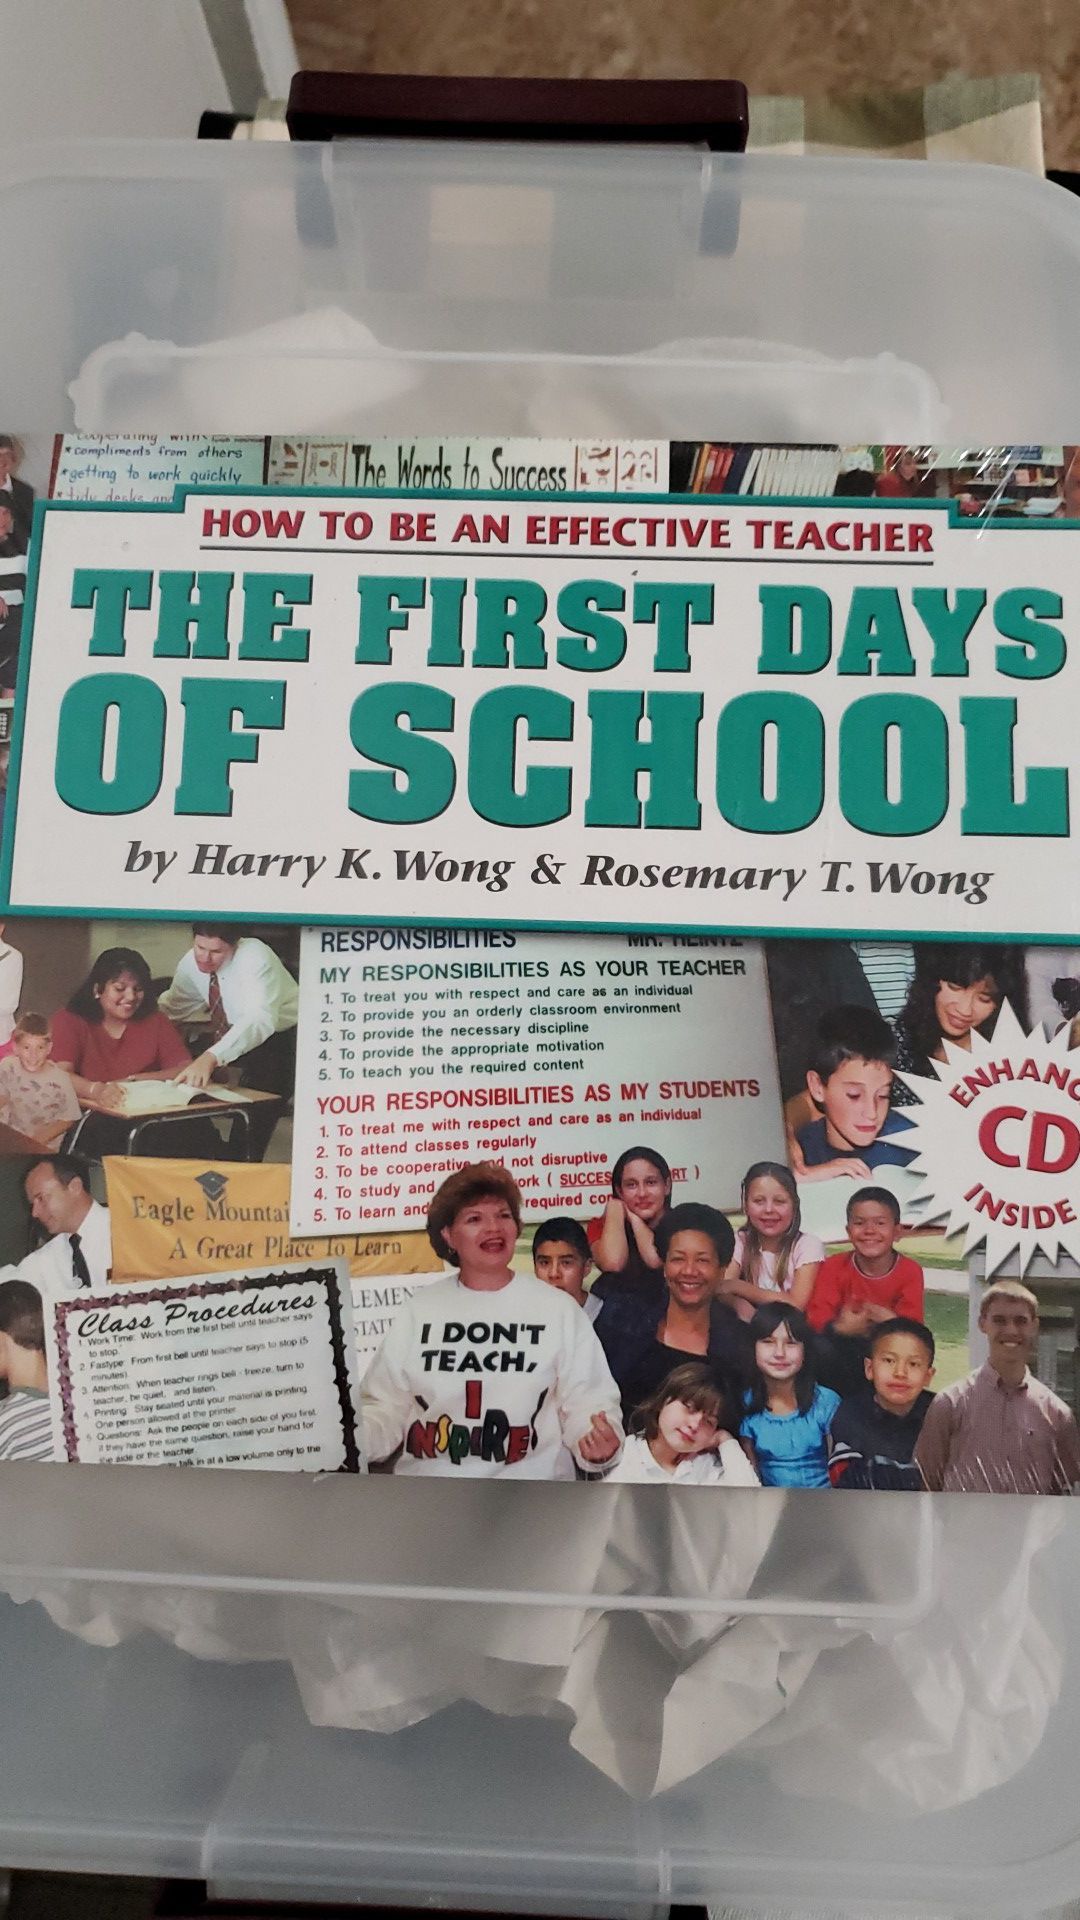 How To Be An Effective Teacher- The First Days of School